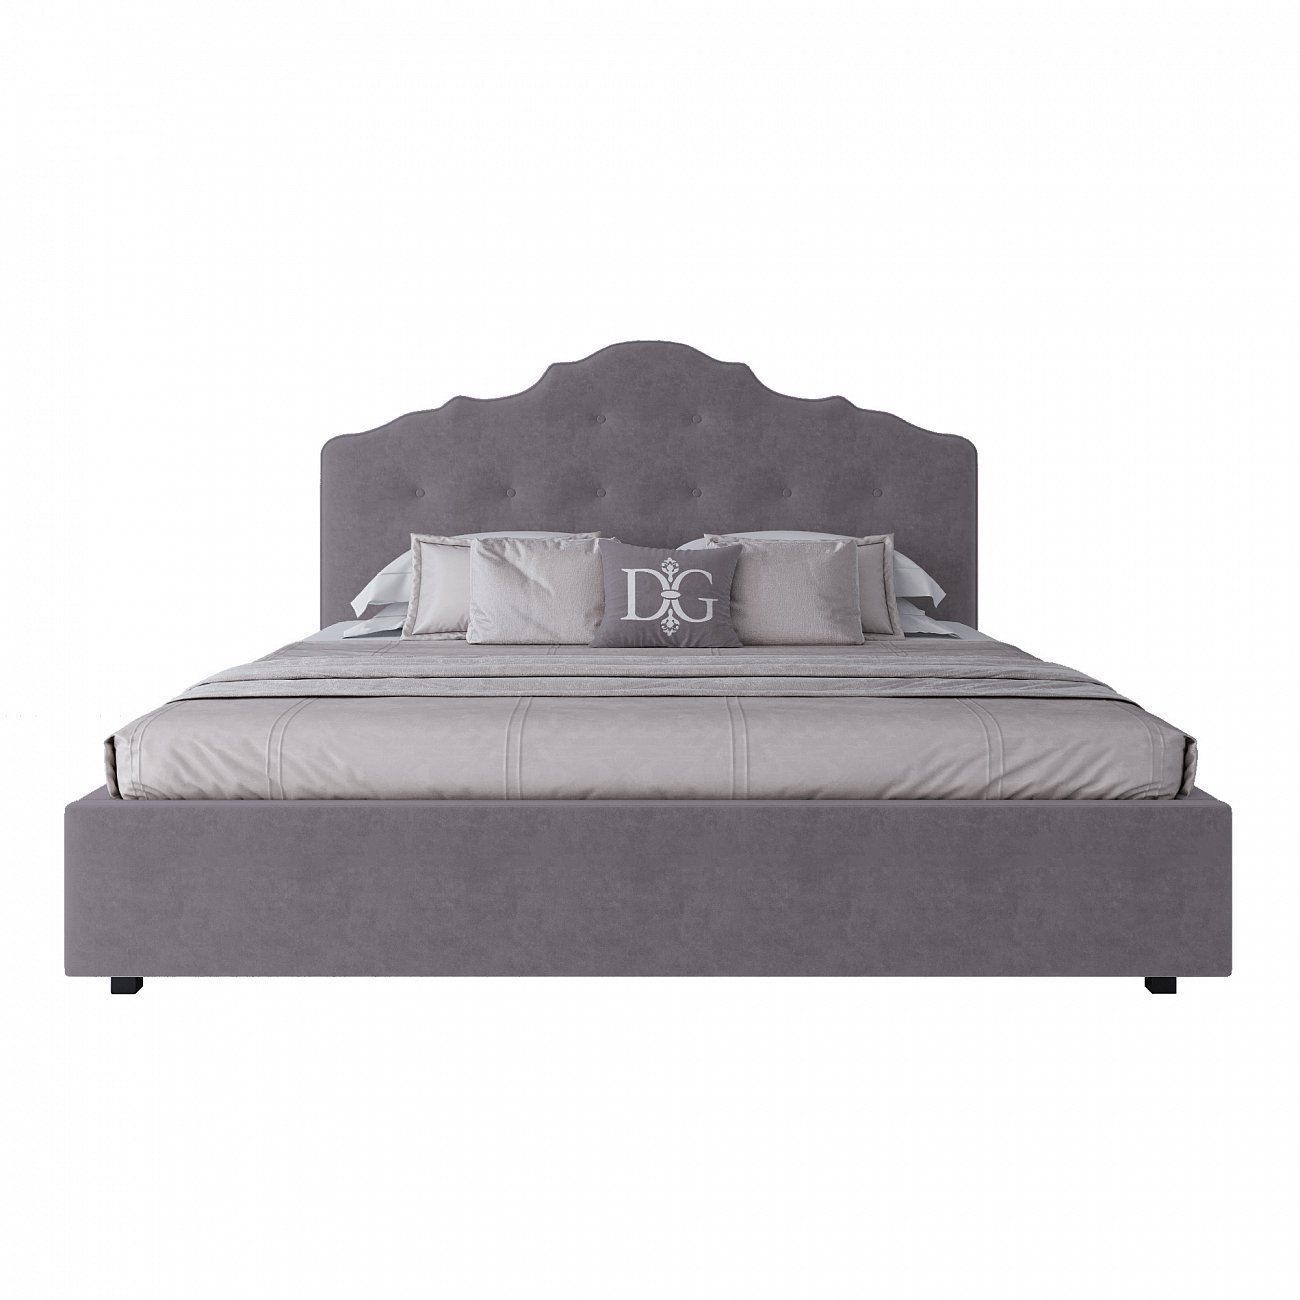 The bed is large 200x200 Palace grey